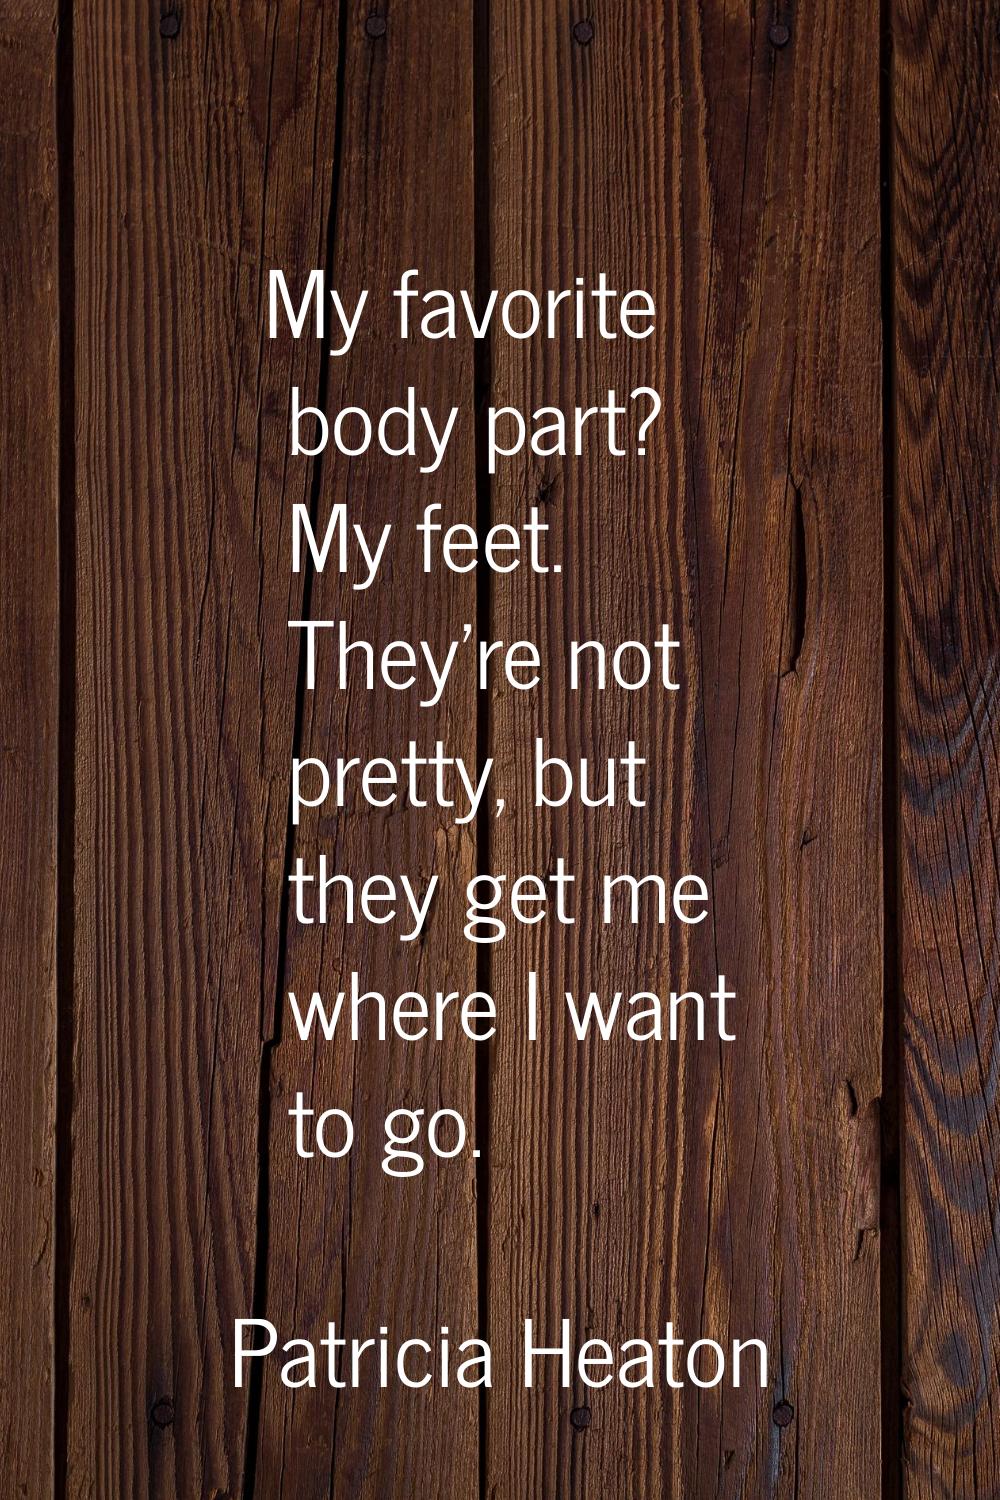 My favorite body part? My feet. They're not pretty, but they get me where I want to go.